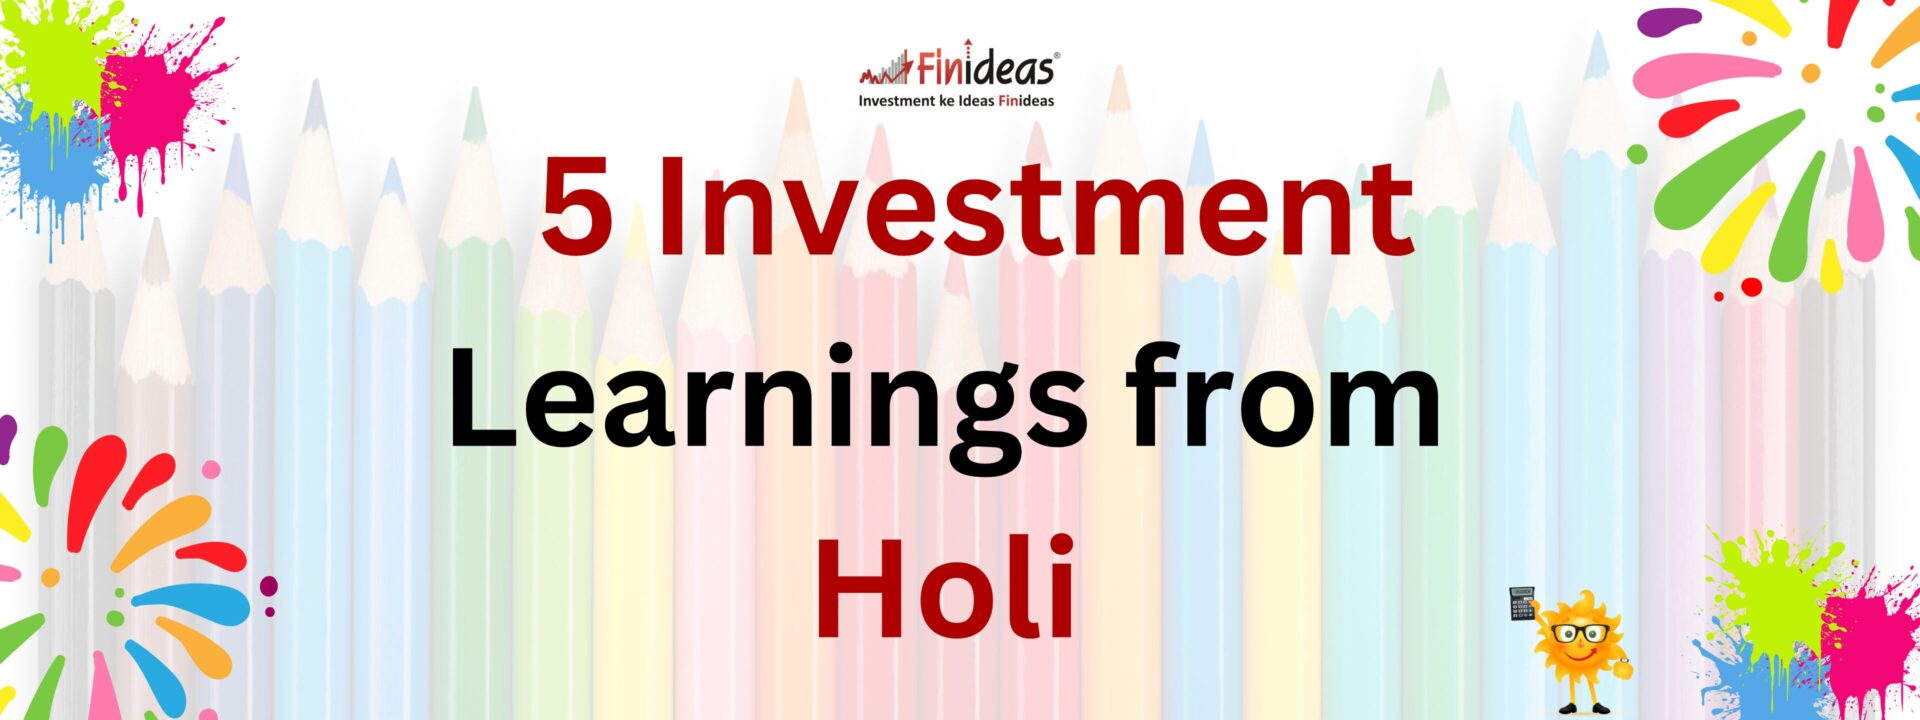 5 Investment Learnings from Holi Festival